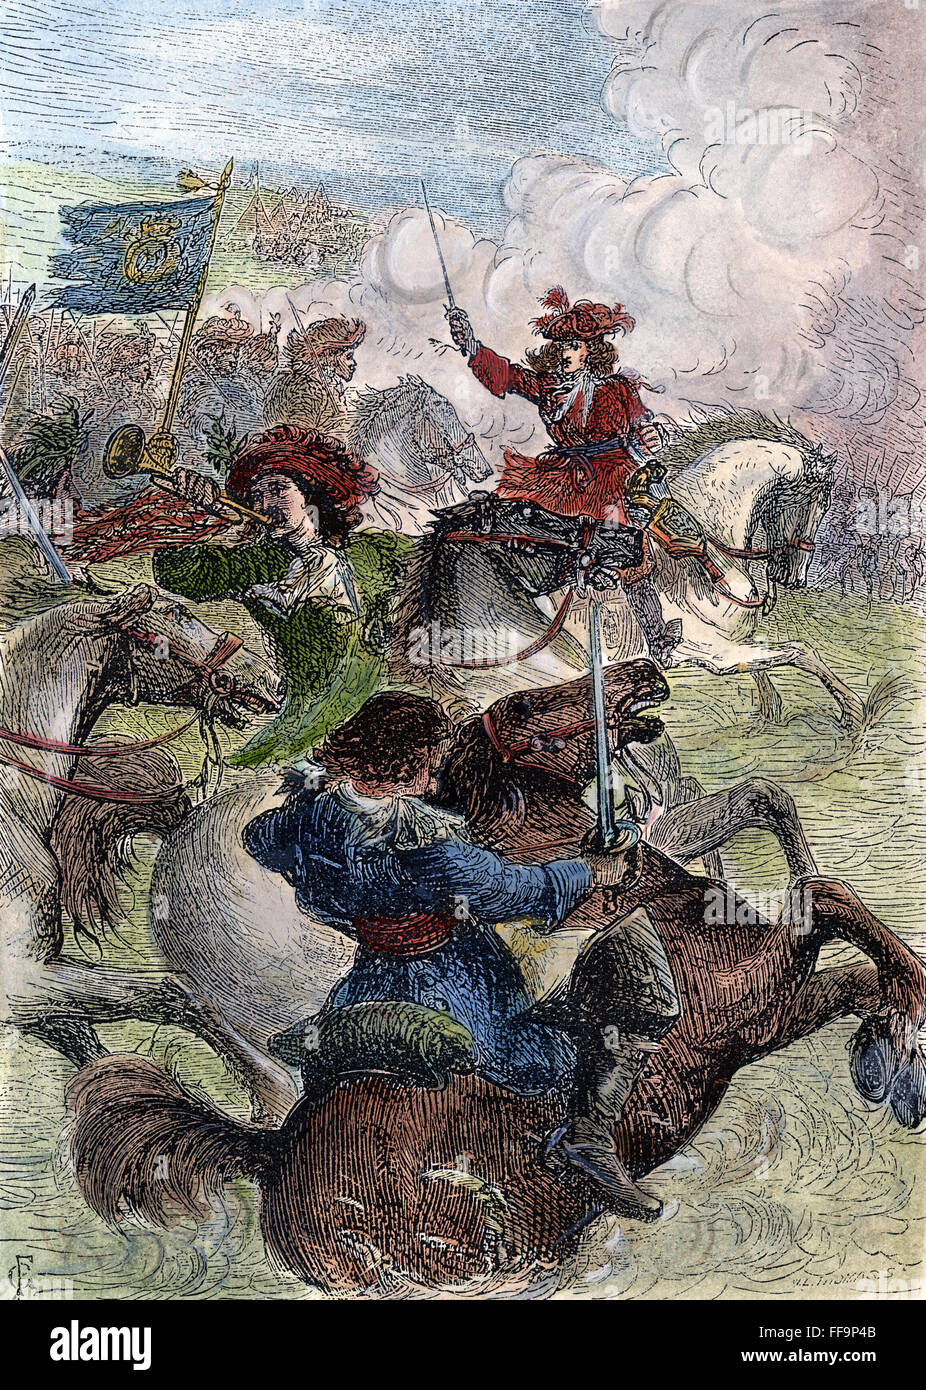 WILLIAM III: BOYNE, 1690. /nThe King of England at the Battle of the Boyne in Ireland. Wood engraving, 19th century. Stock Photo